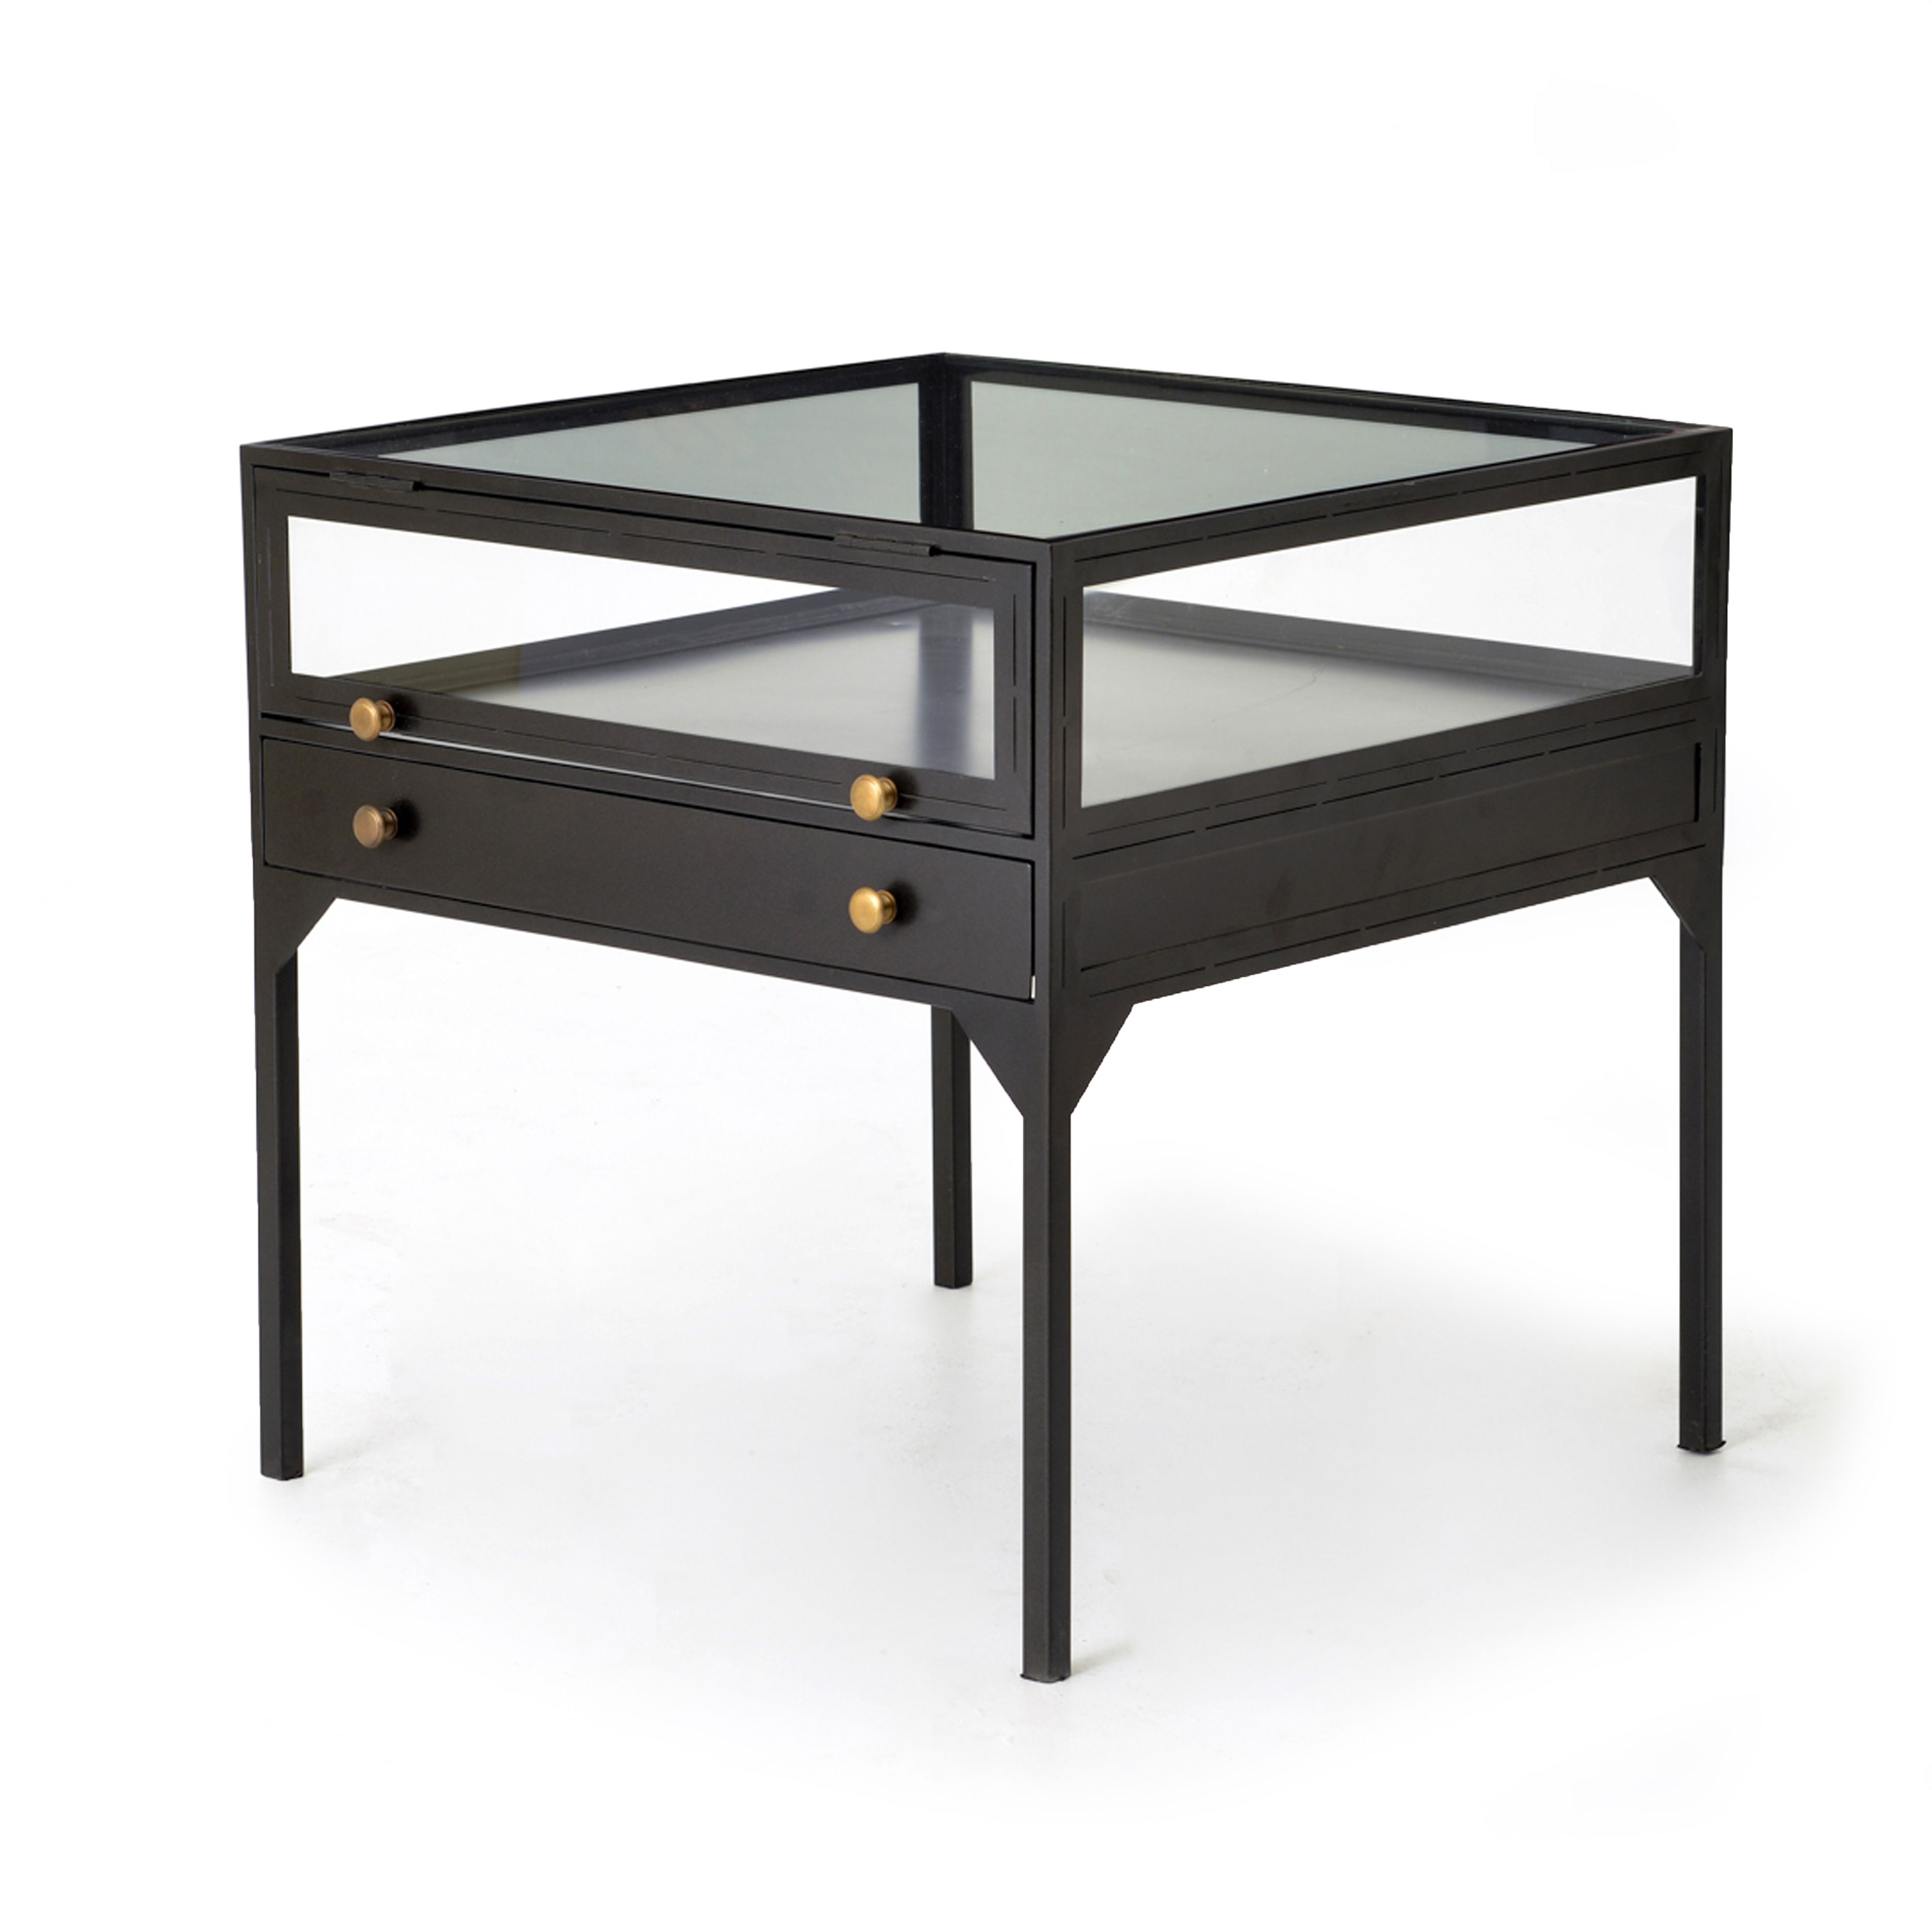 Shadow Box End Table | Scout & Nimble